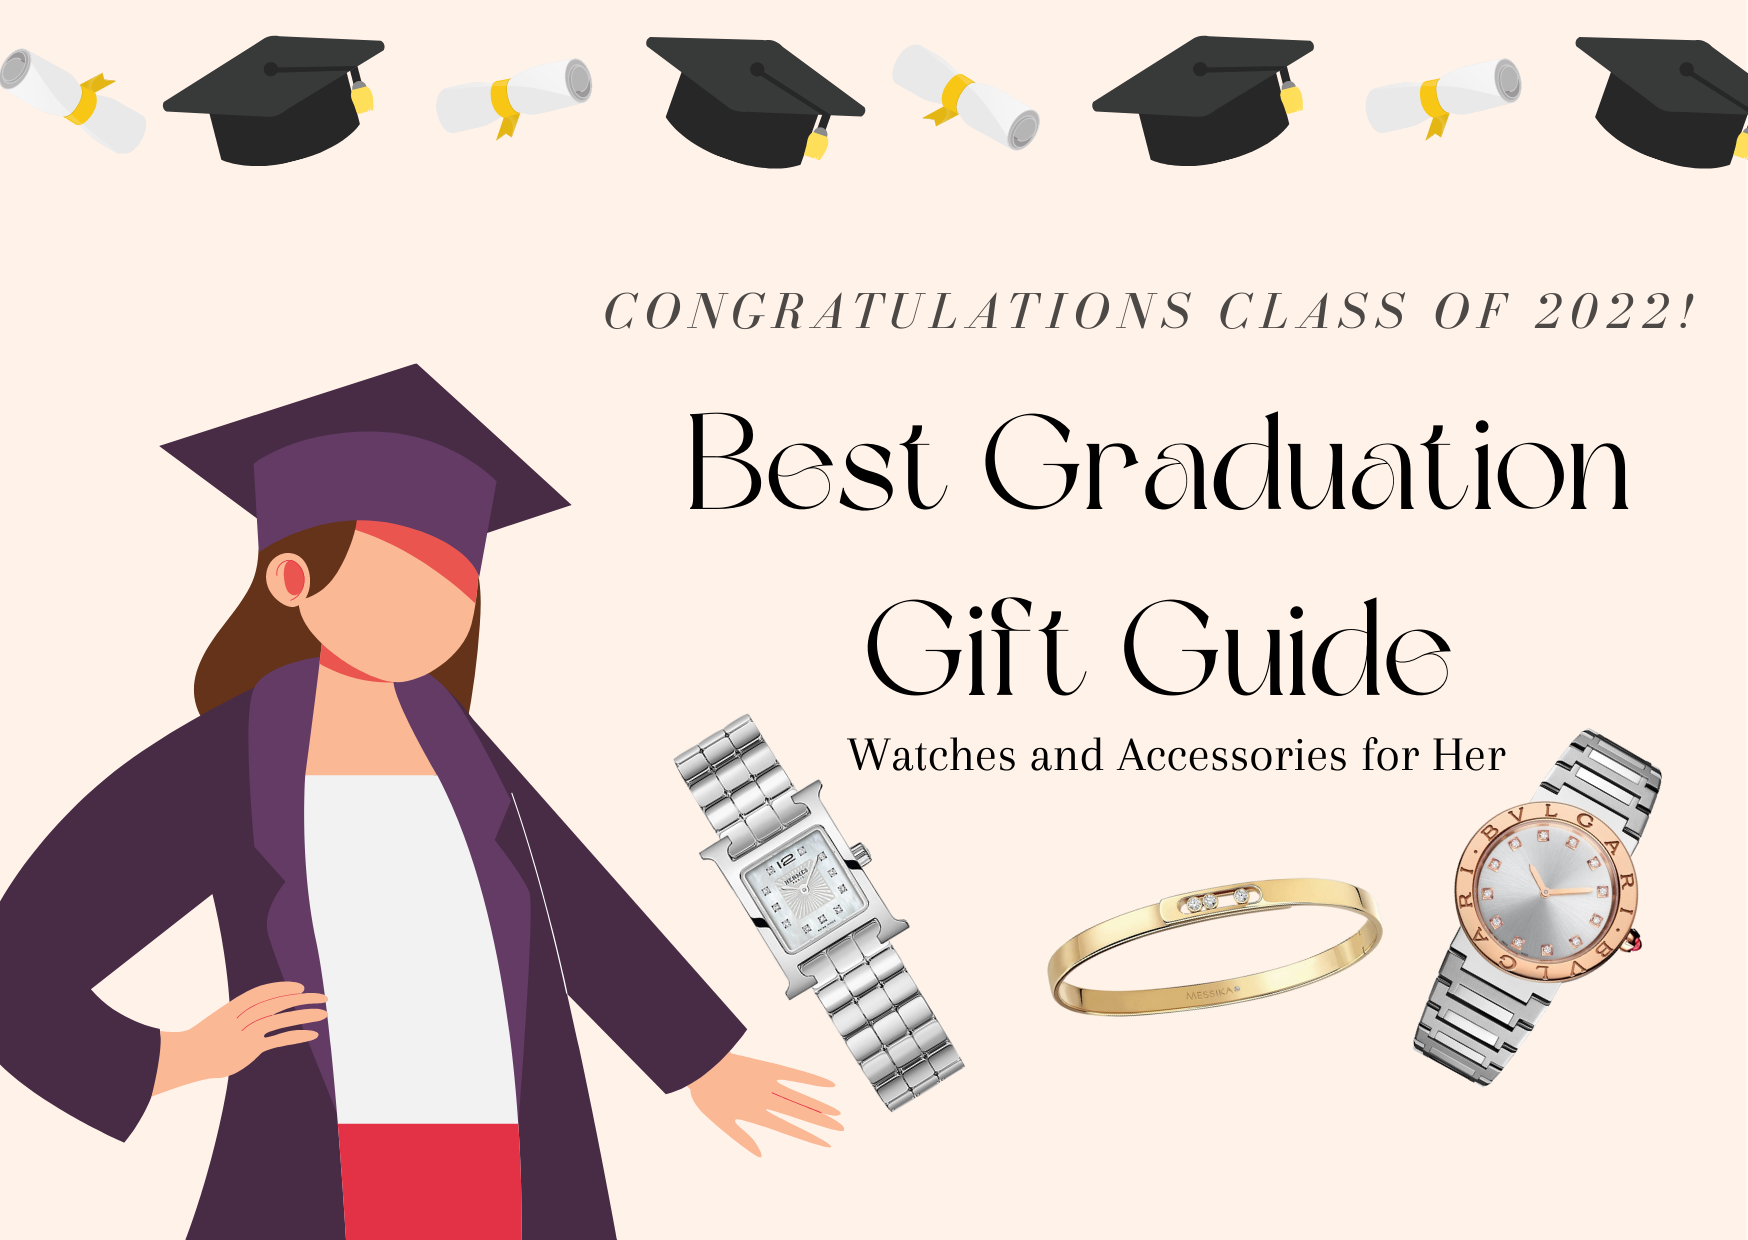 Best Graduation Gift Guide - Watches and Accessories for Her